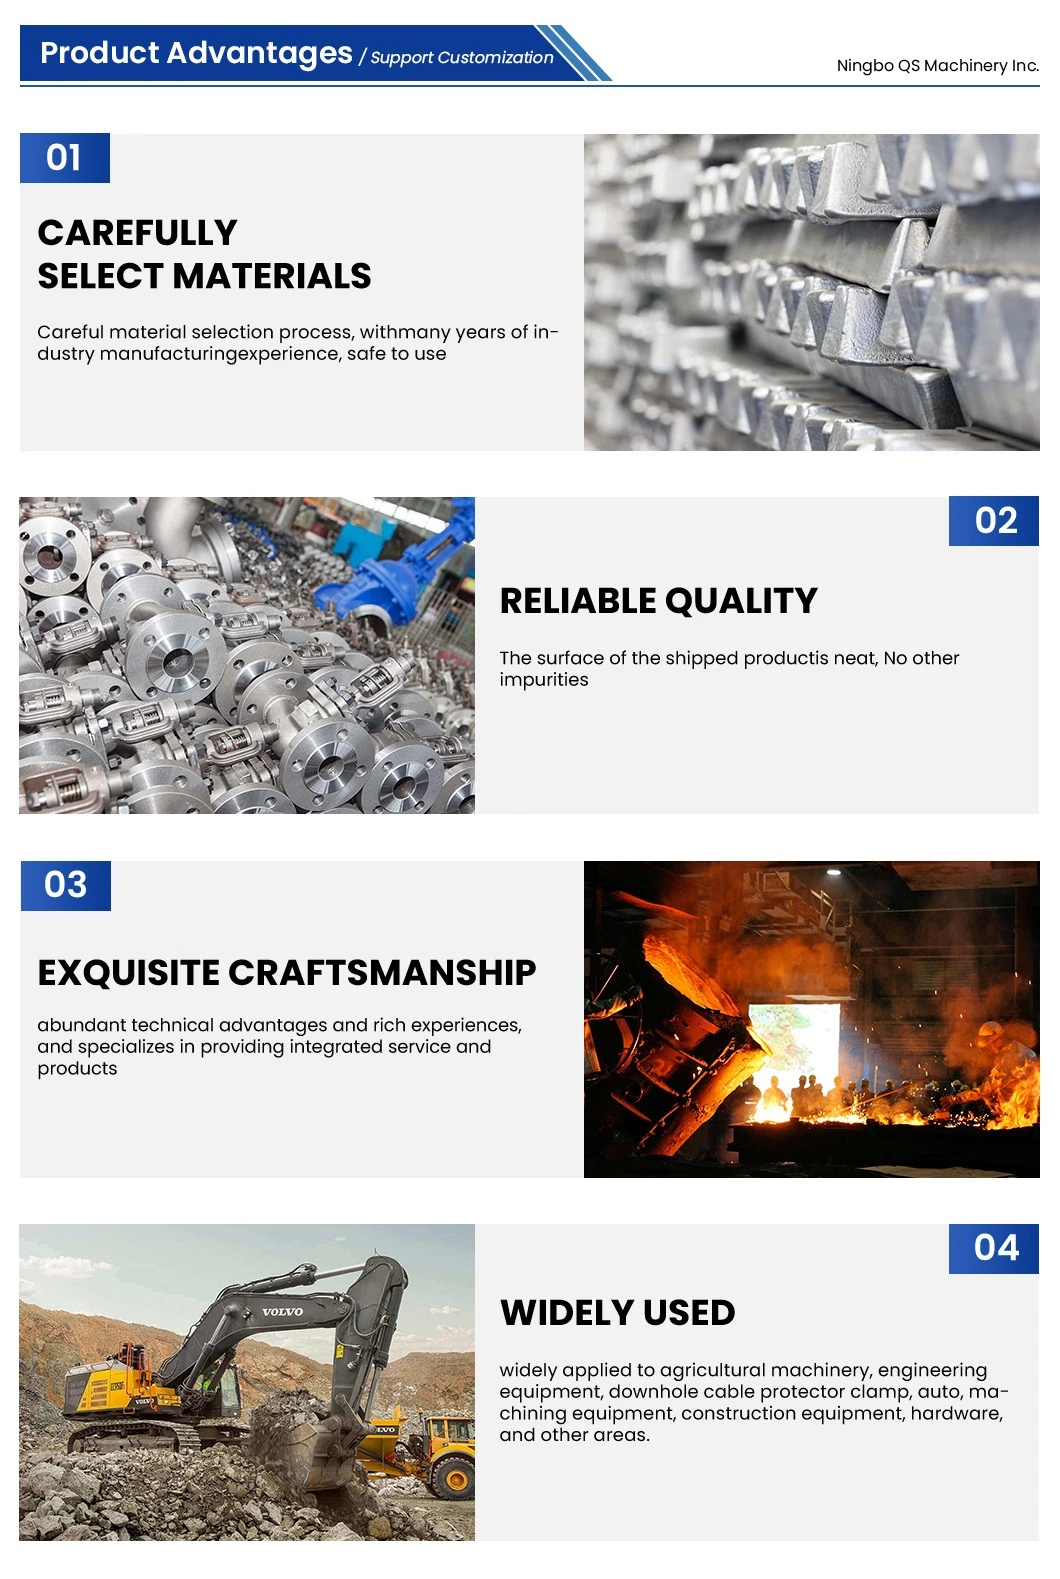 QS Machinery Cast Metals Inc ODM Casting Gate Design Processing Services China Steel Metal Parts Investment Casting Parts for Agricultural Machinery